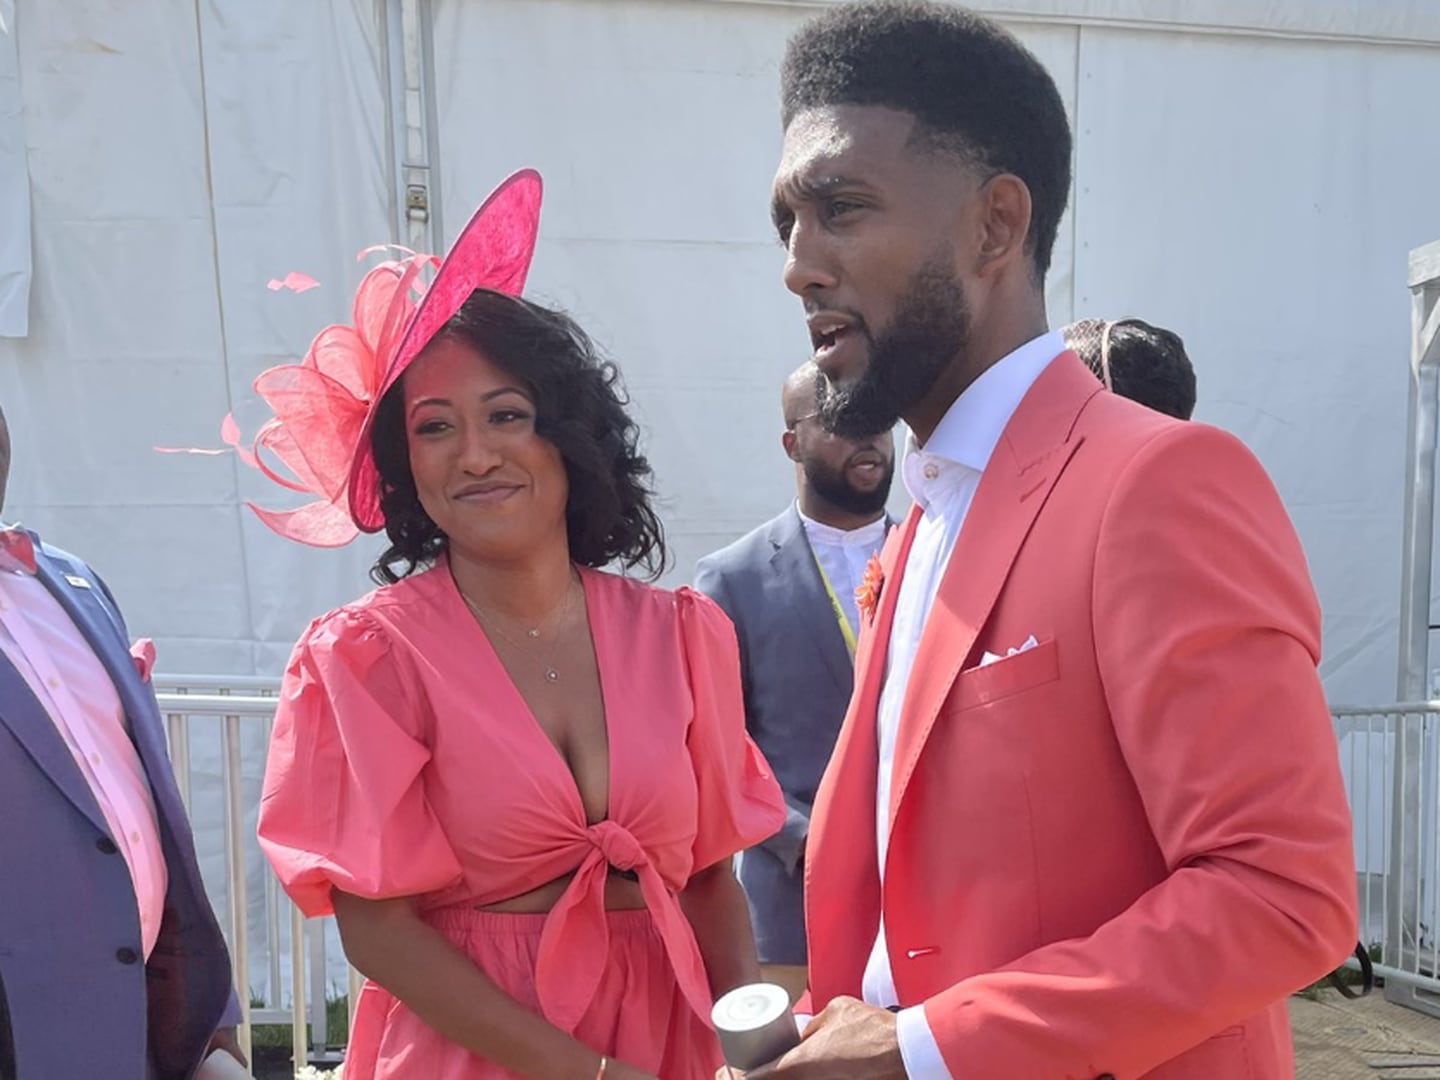 Mayor Brandon Scott arrives at the 148th Preakness Stakes. (Pamela Wood/The Baltimore Banner)